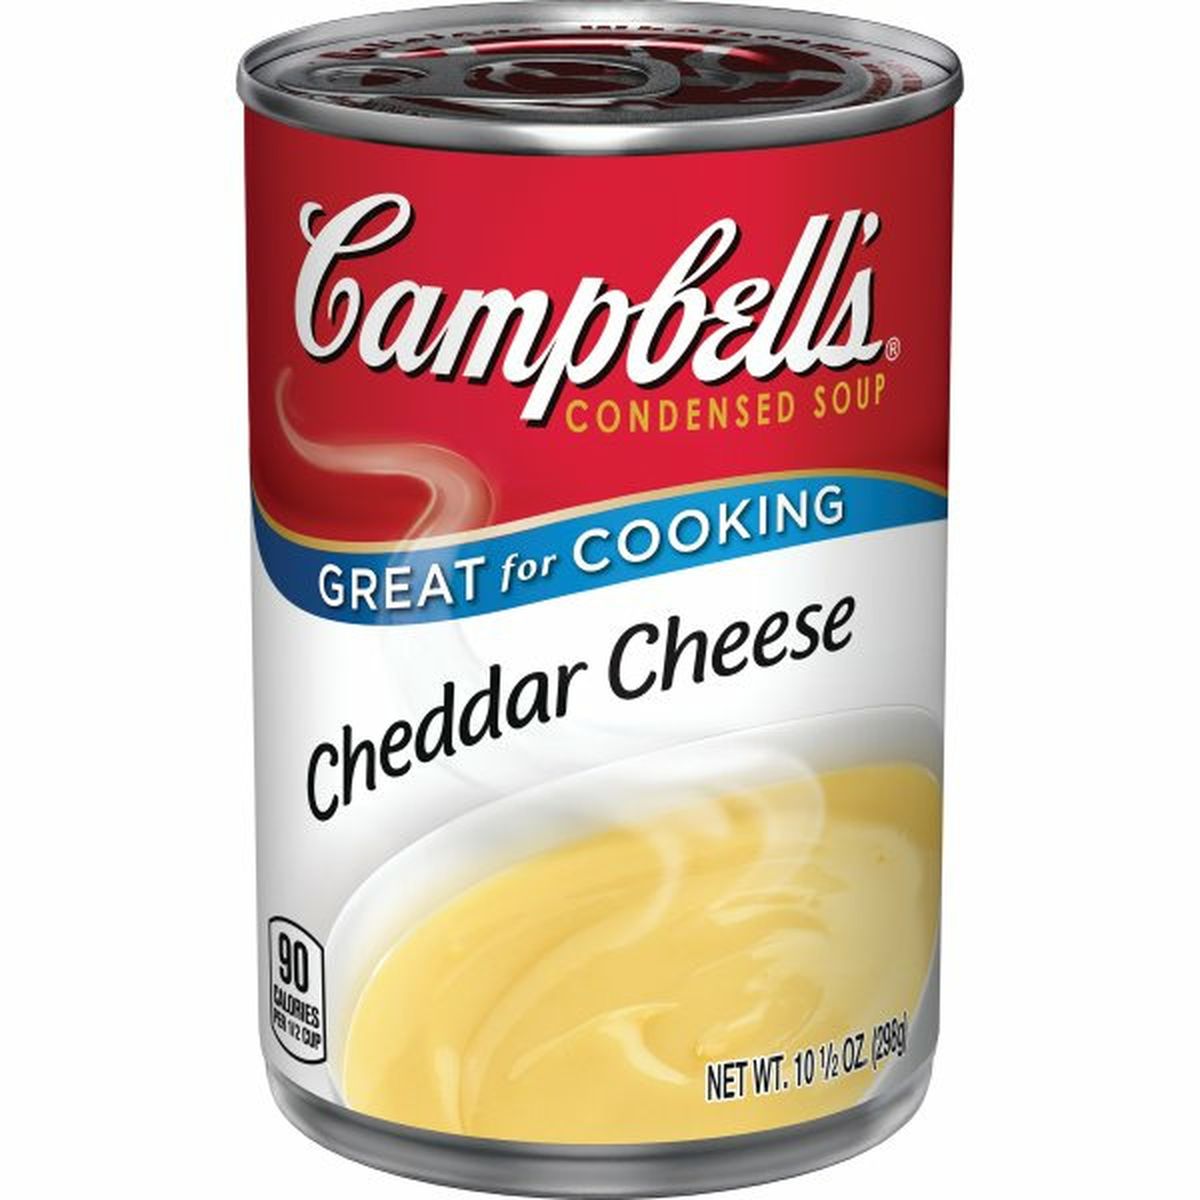 Calories in Campbell'ss Condensed Cheddar Cheese Soup